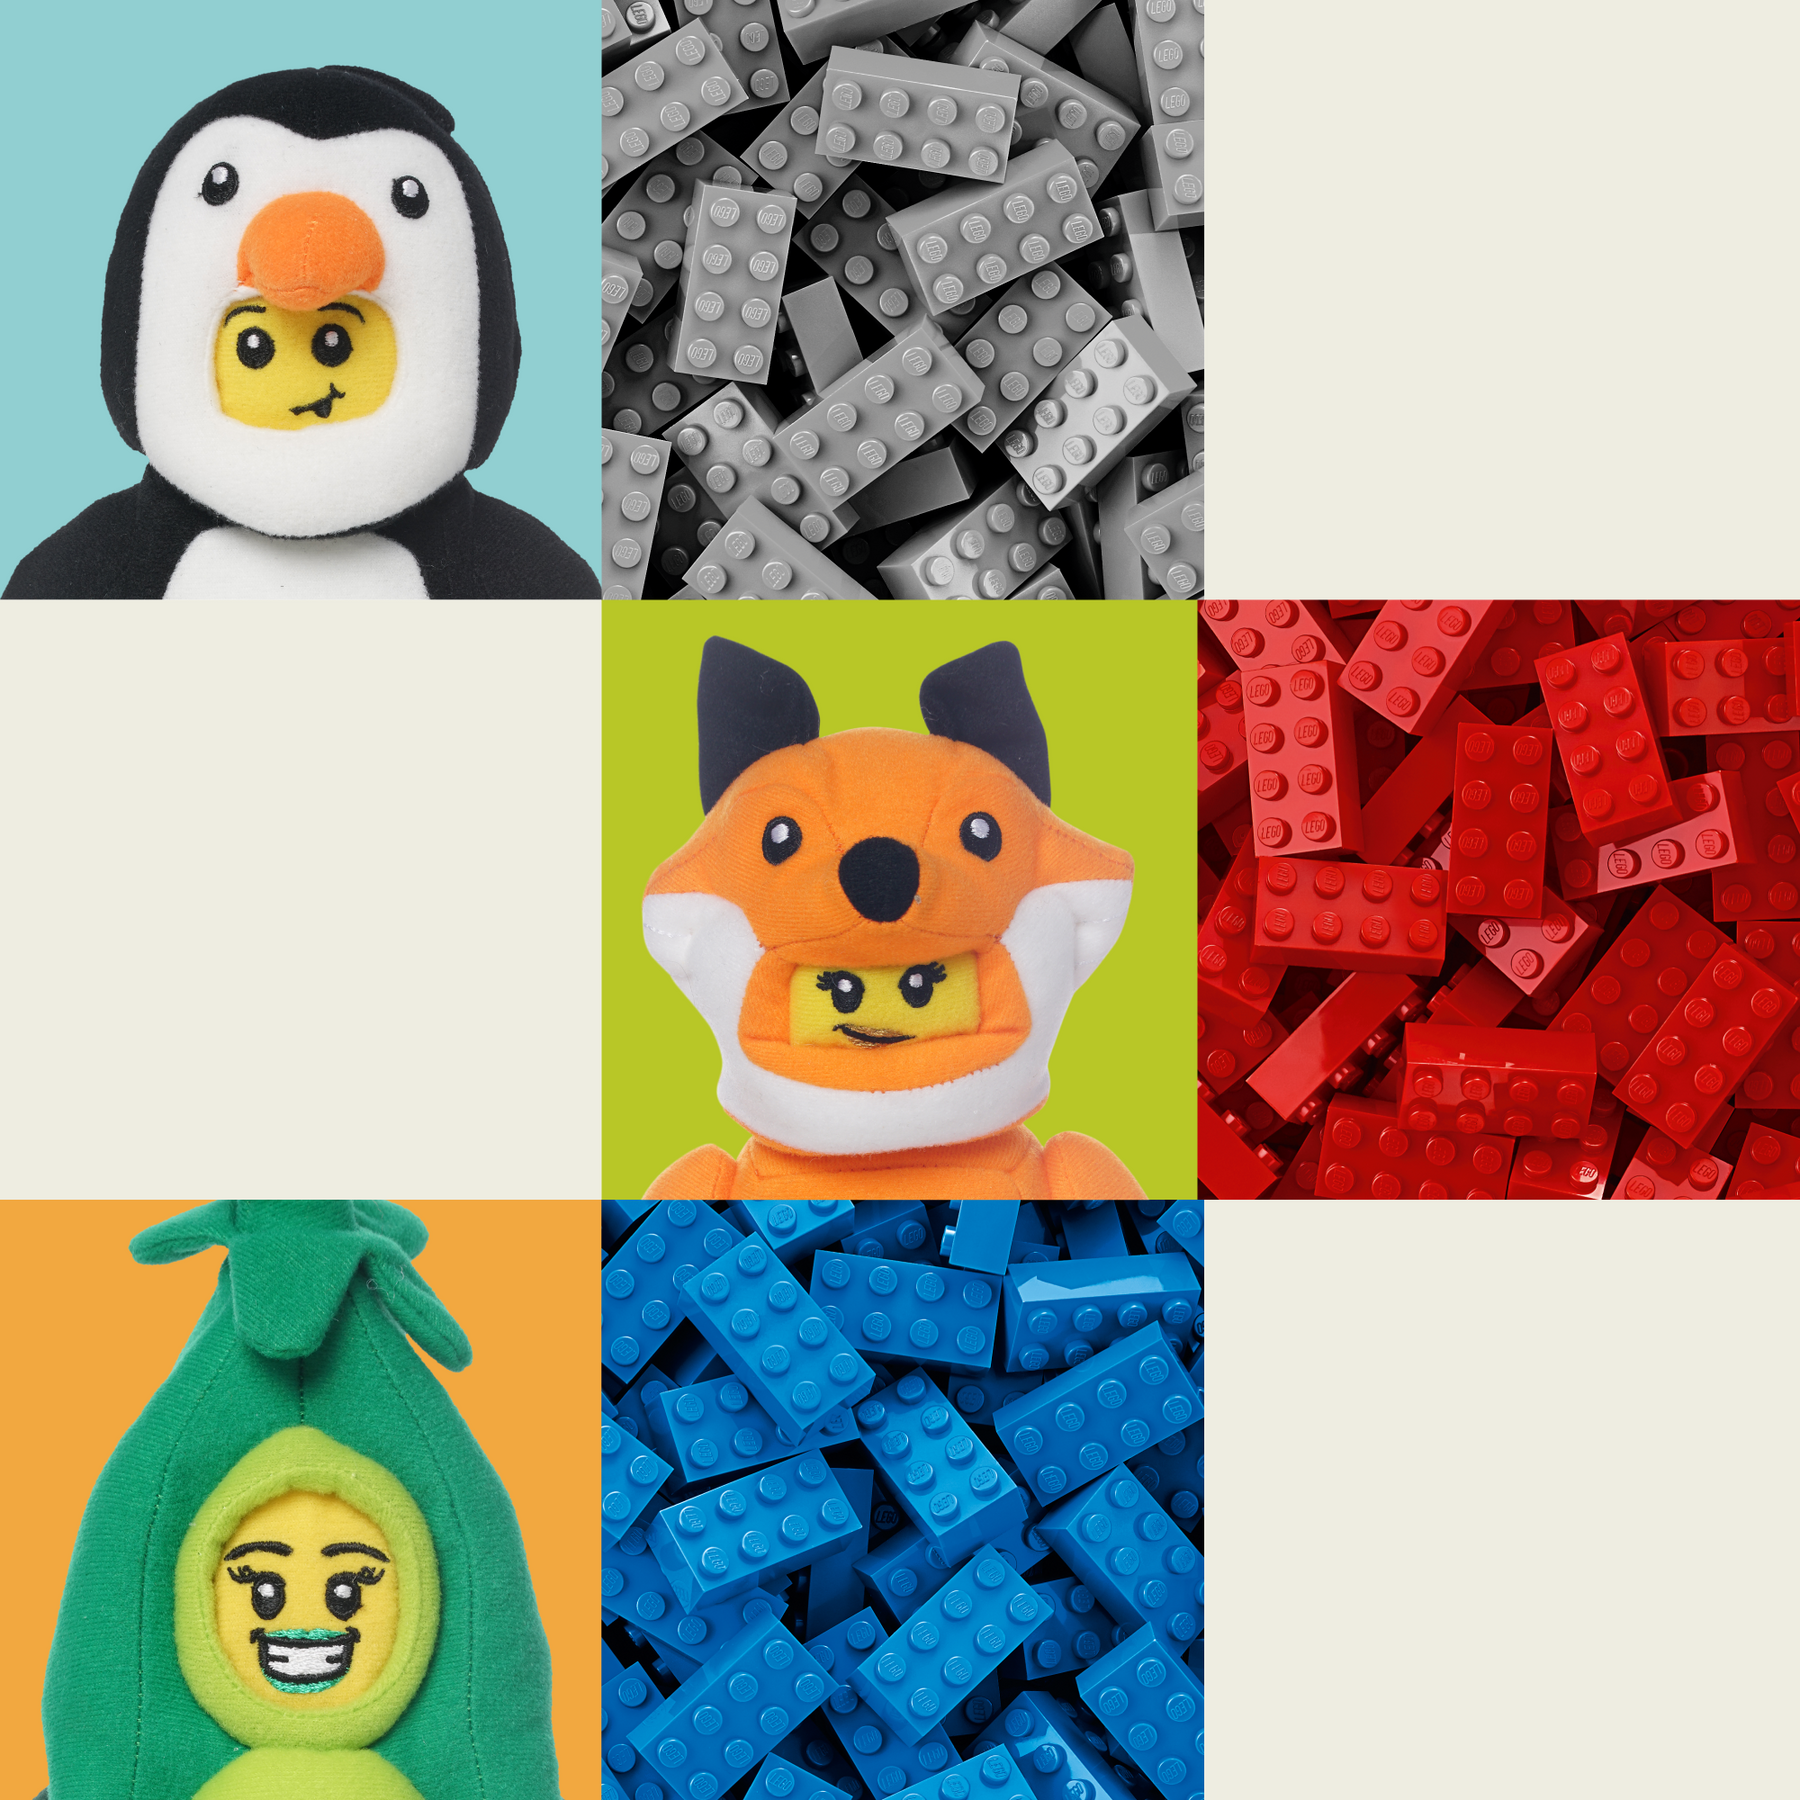 LEGO Plush characters on different colored backgrounds